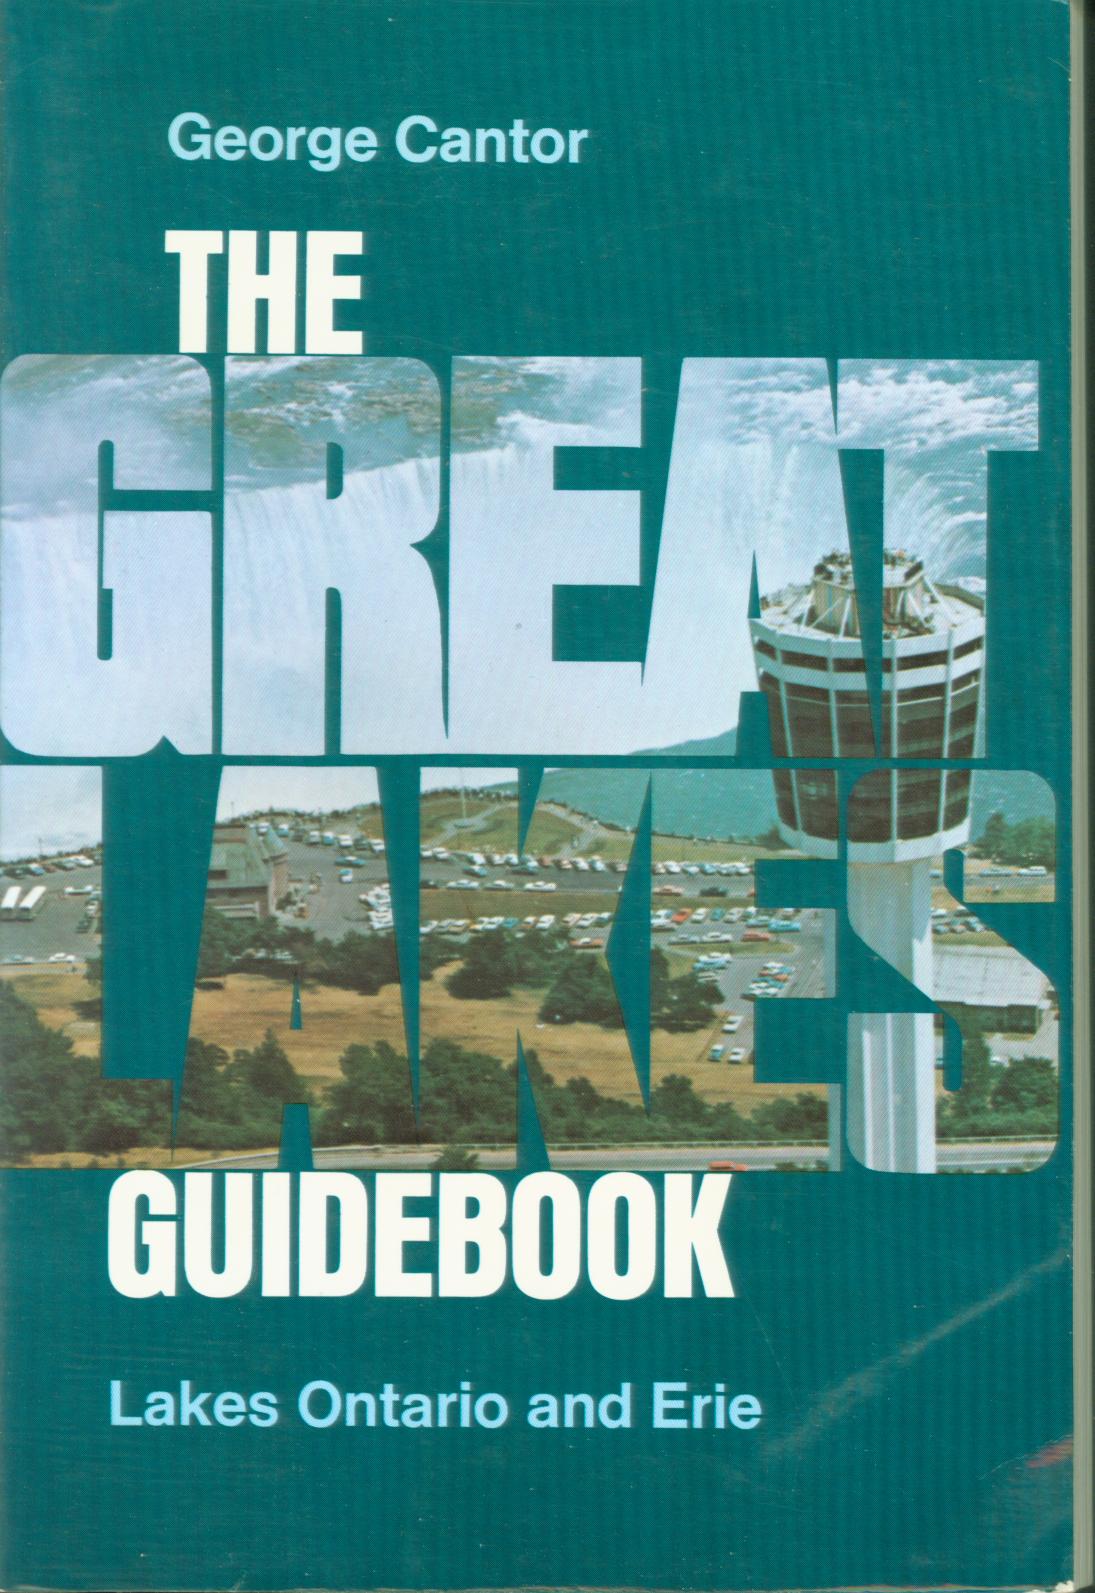 THE GREAT LAKES GUIDEBOOK--Lakes Ontario & Erie. 